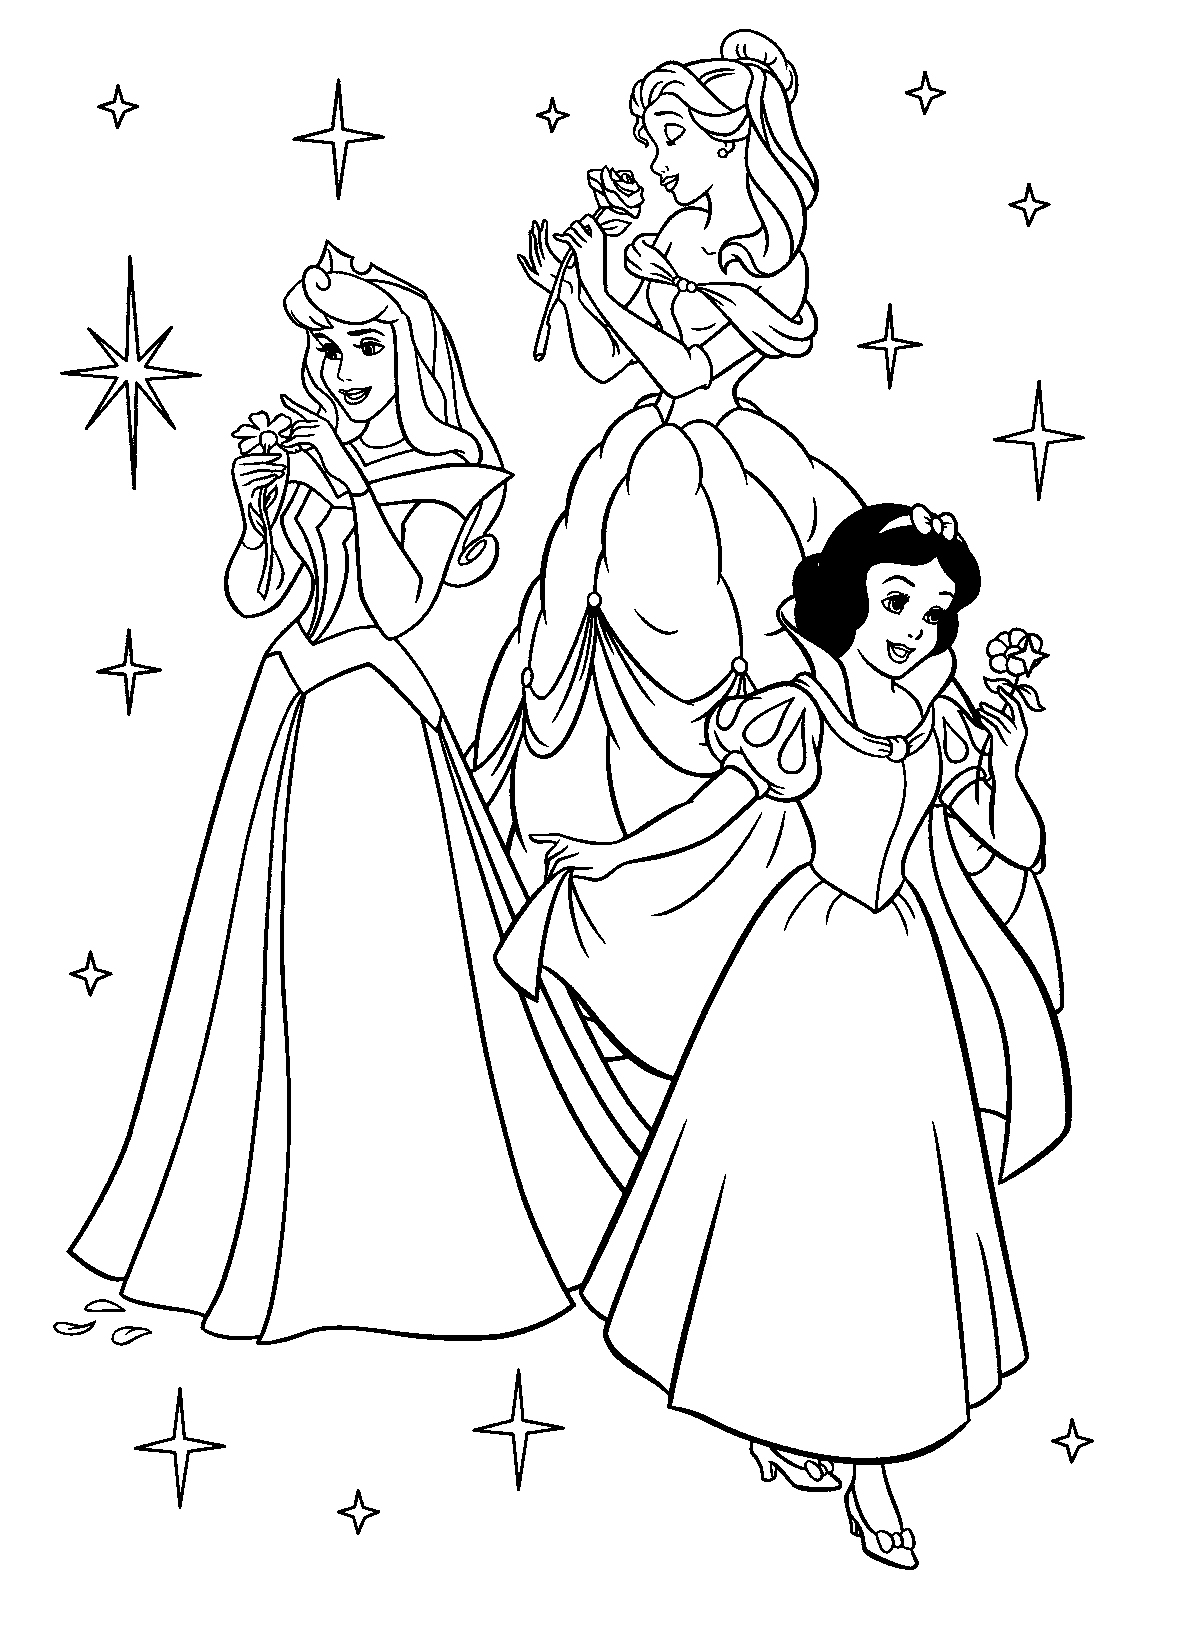 Coloring Pages For Free Disney Rsad Coloring Pages Kleurplaten Disney Kleurplaten Prinsessen